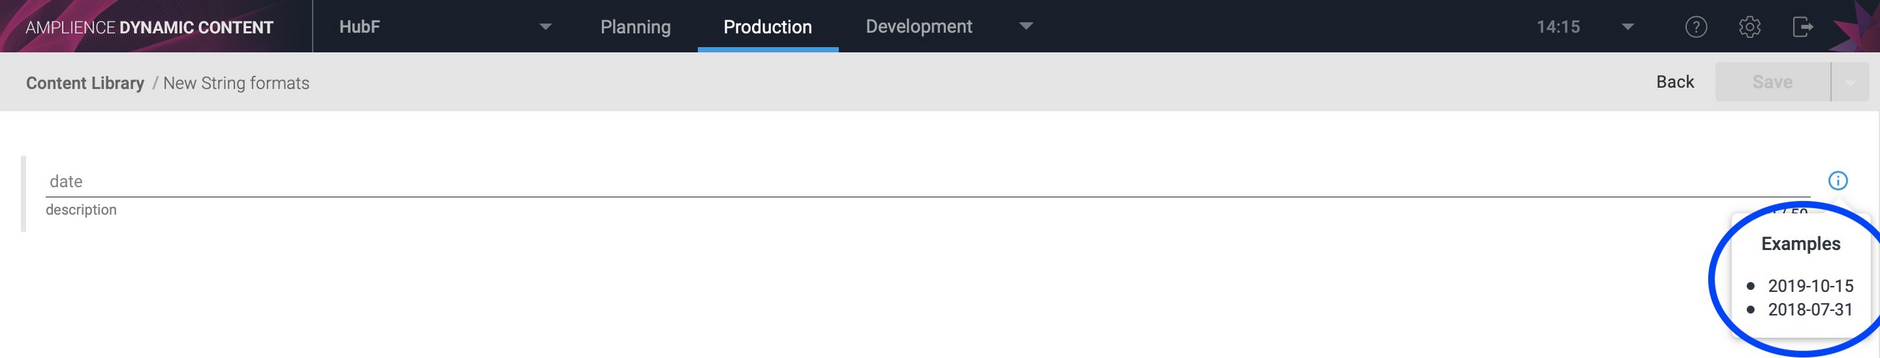 The examples keyword allows a developer to provide sample values for a property. These are displayed in the content editing window in the production view.